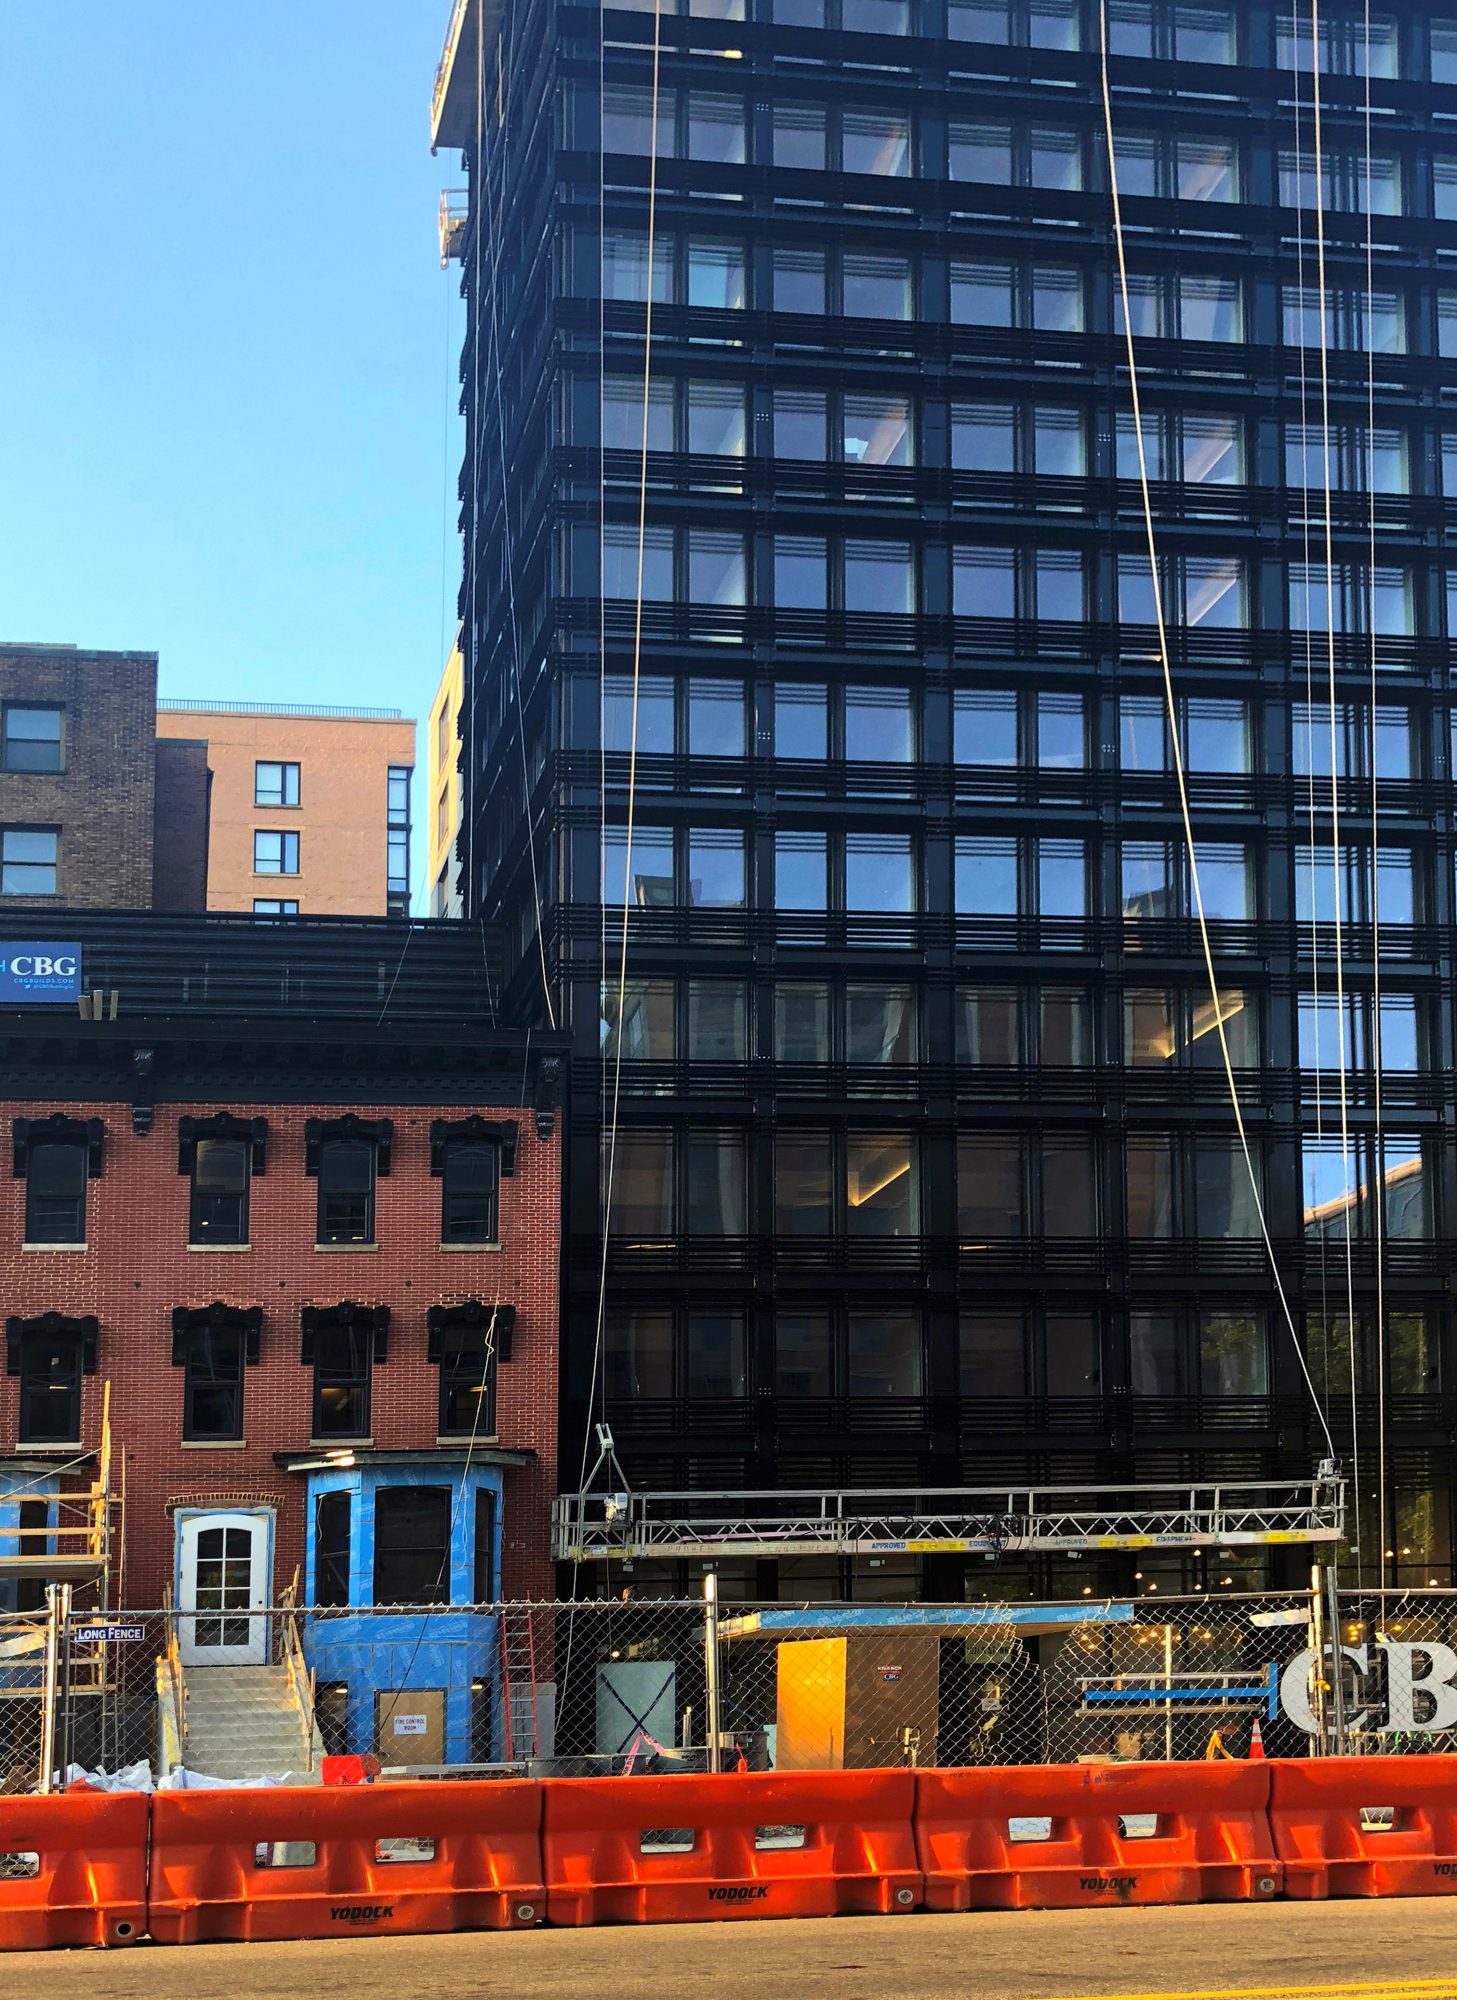 Moxy Moxy Hotel nearing completion - featuring INTUS Windows in the main building and in the neighboring restored historic building